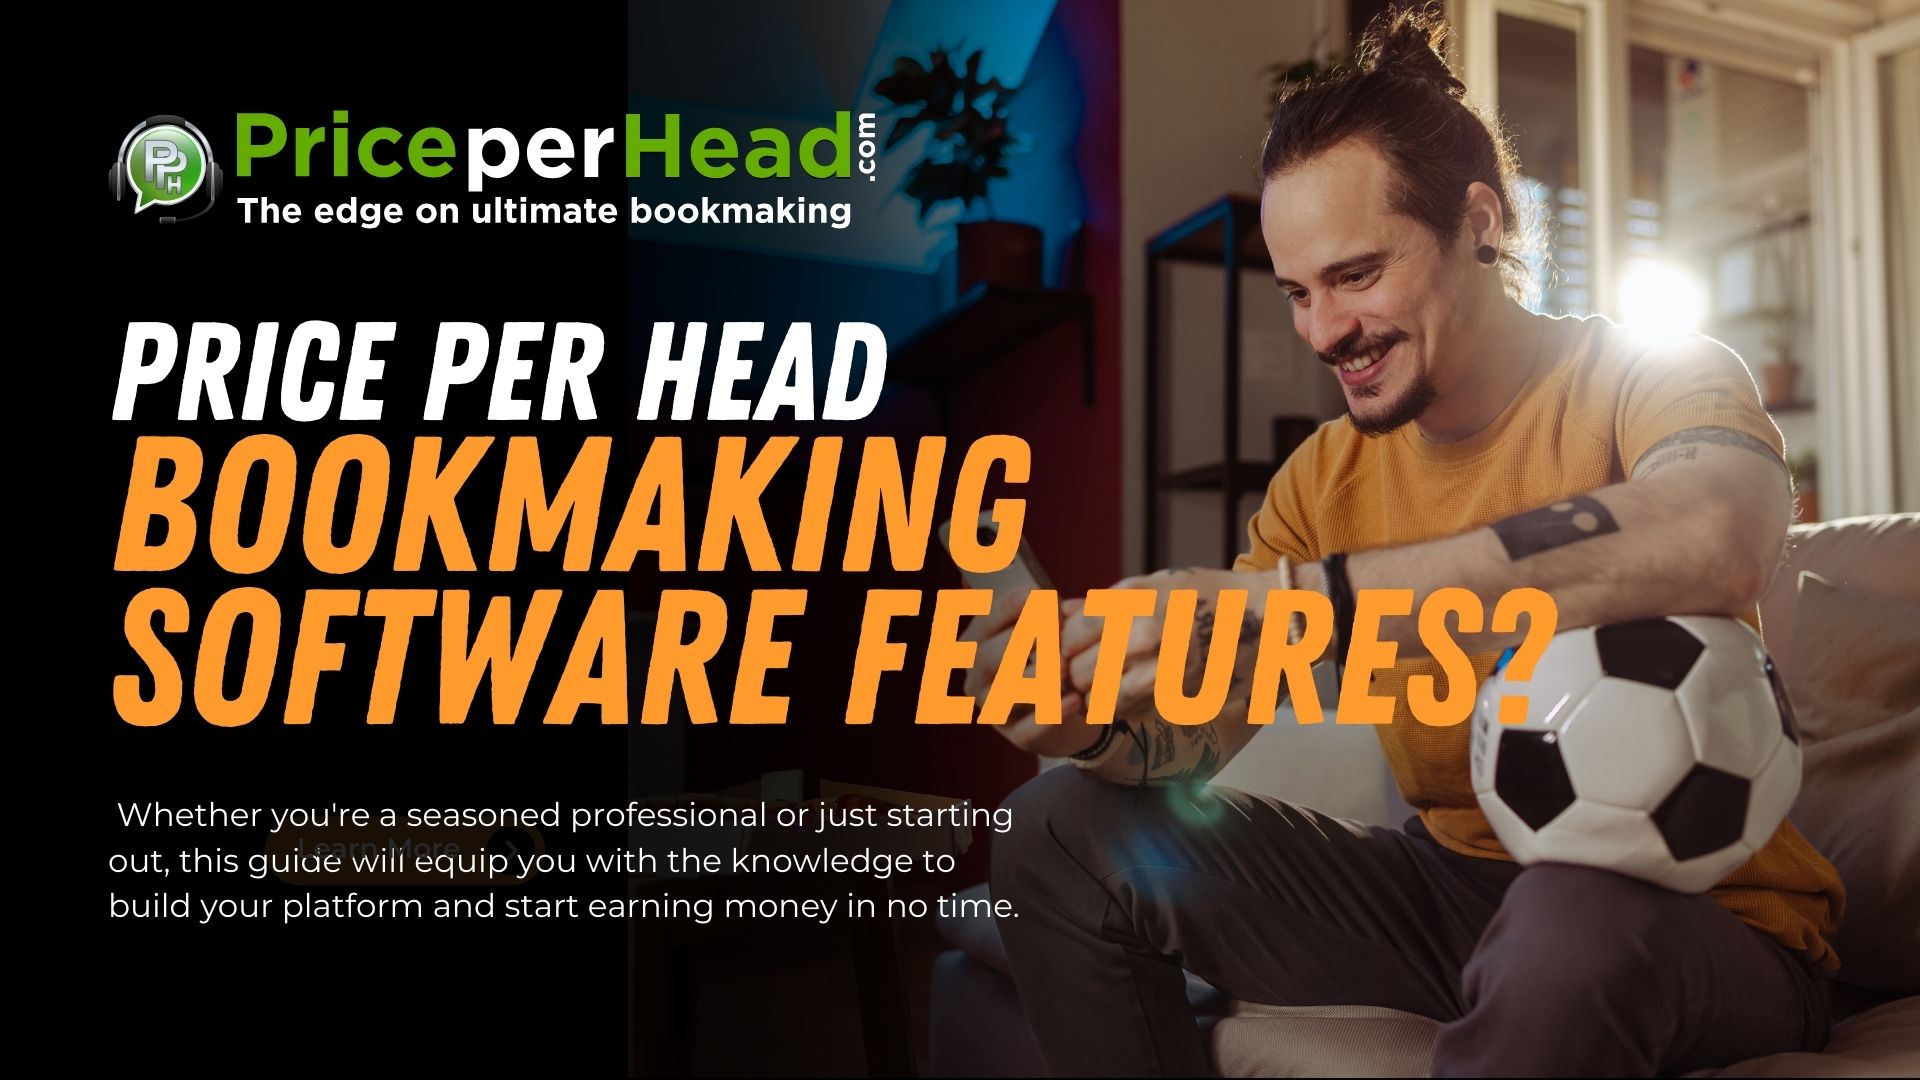 bookmaking software features, pay per head, price per head